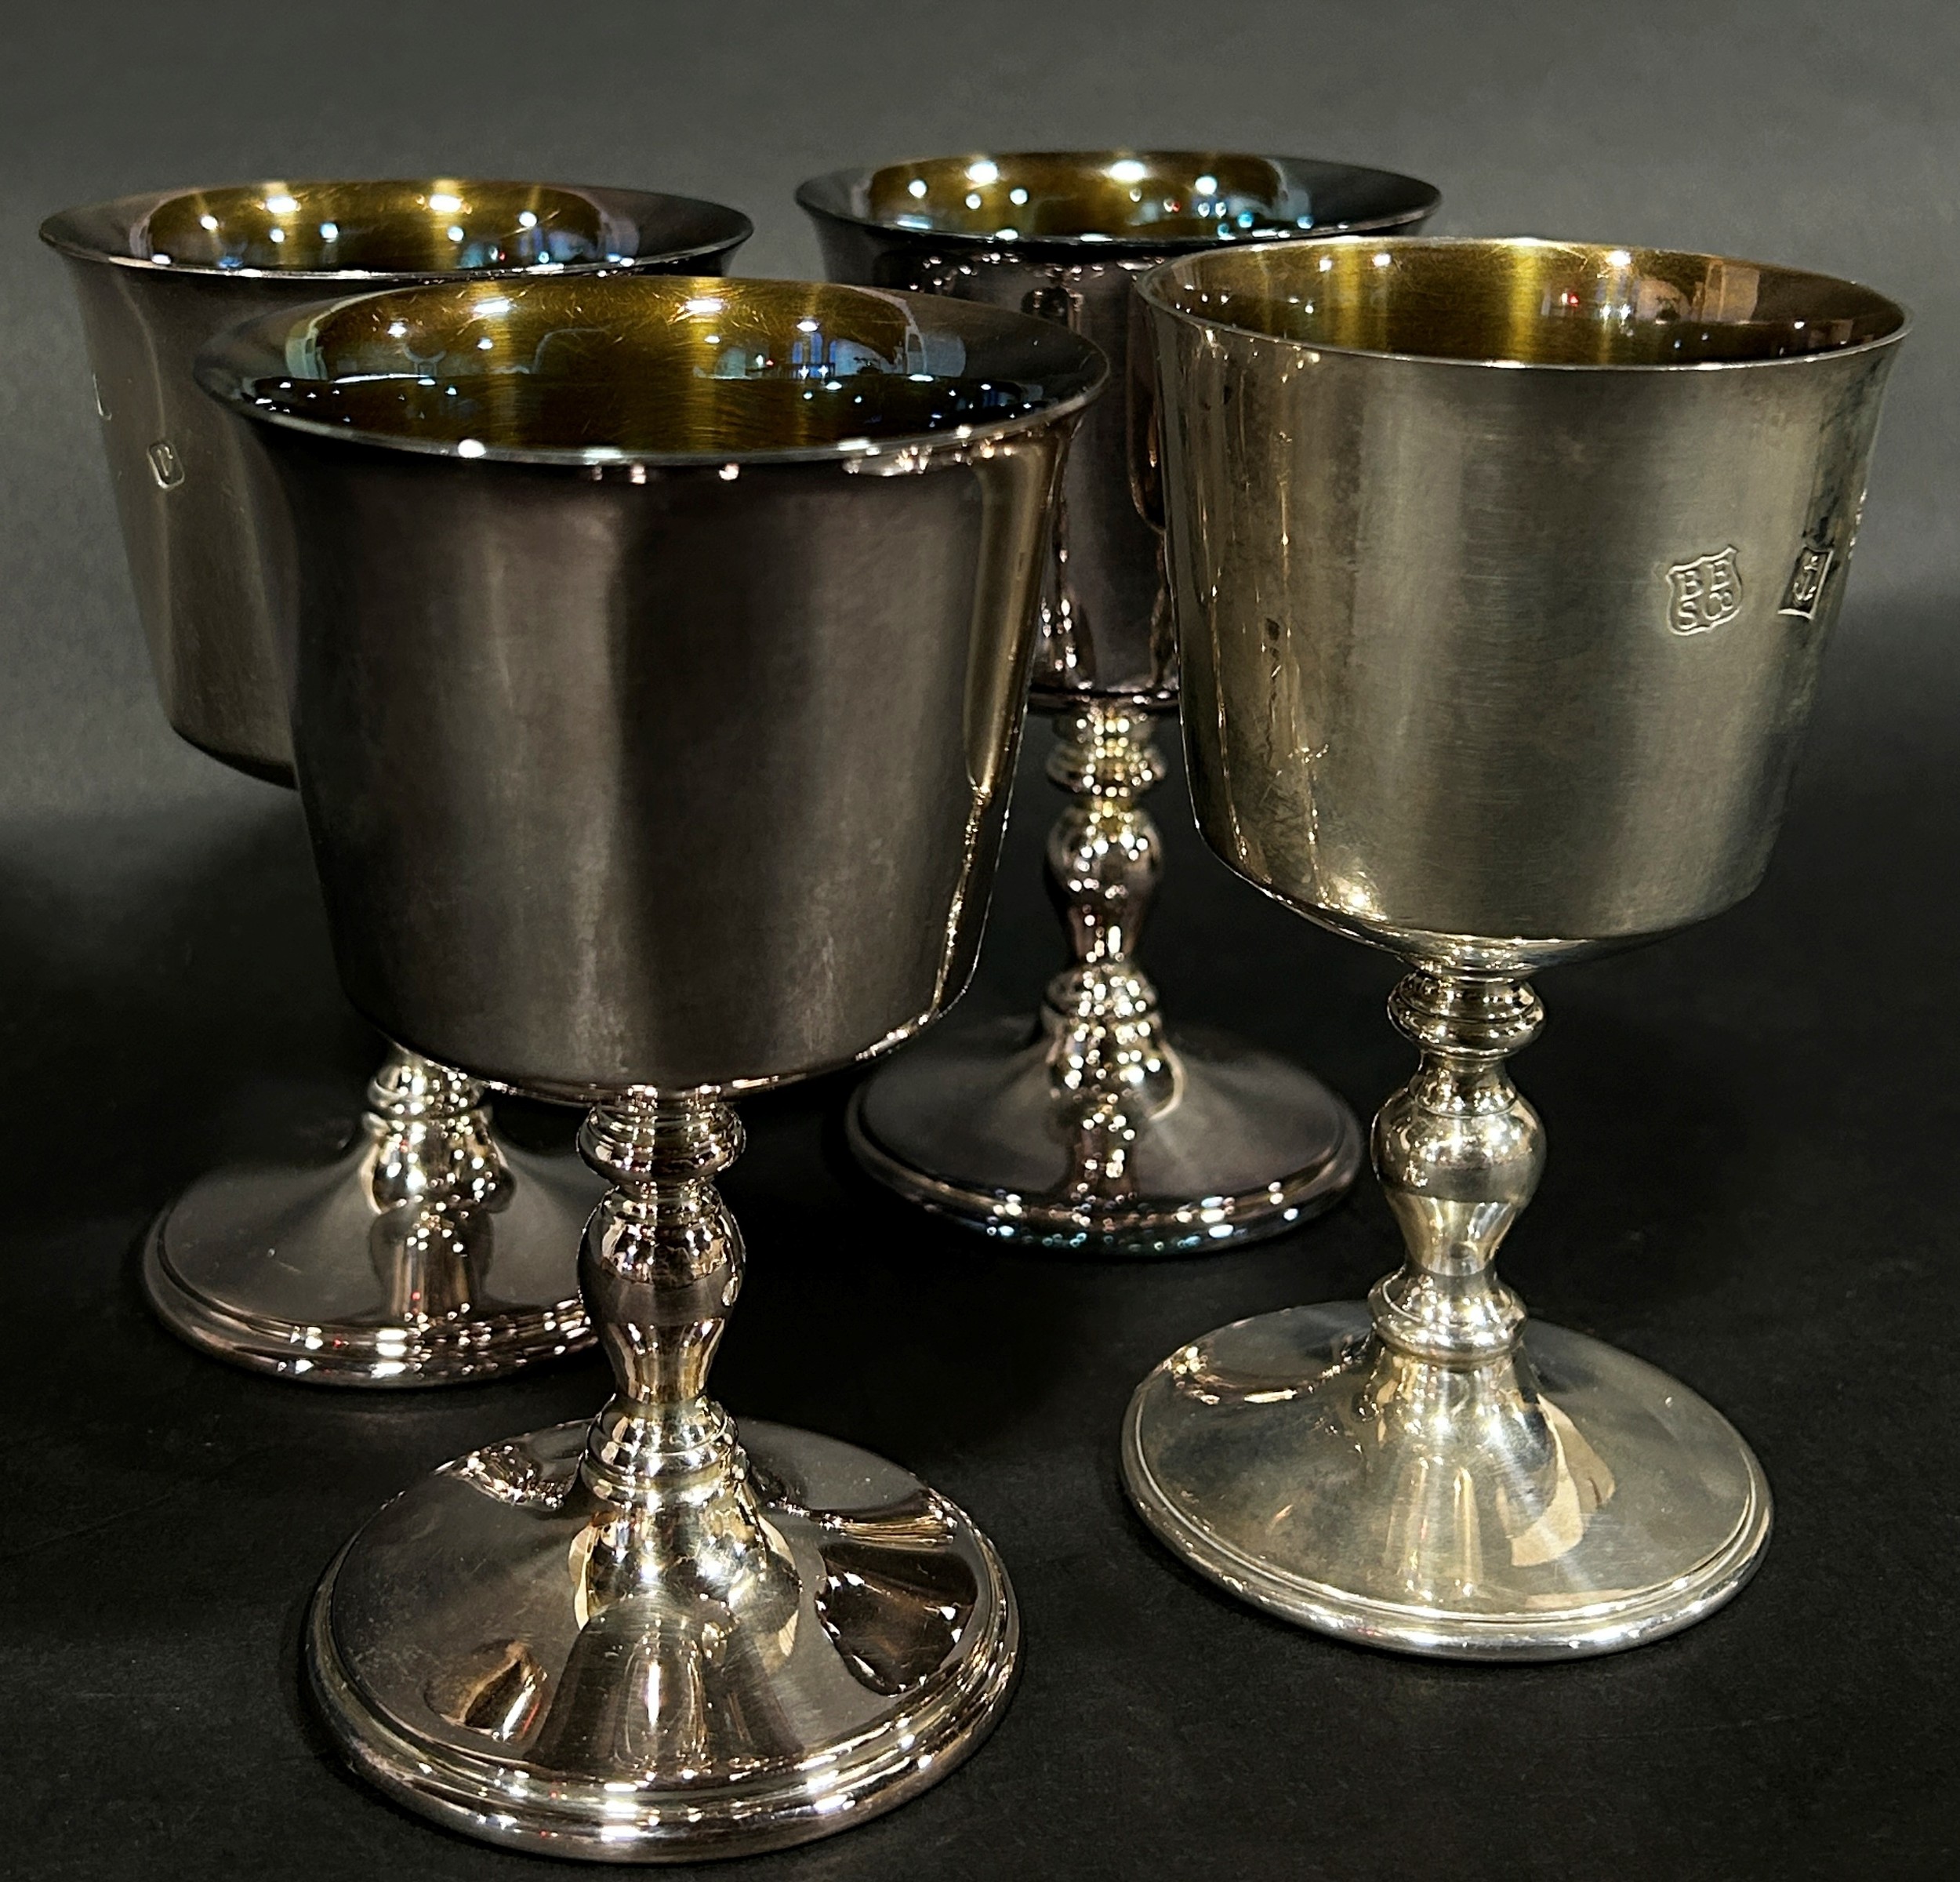 Four silver gilt wine goblets, Birmingham, late 20th century, makers Barker Ellis Silver Company, 12 - Image 2 of 4